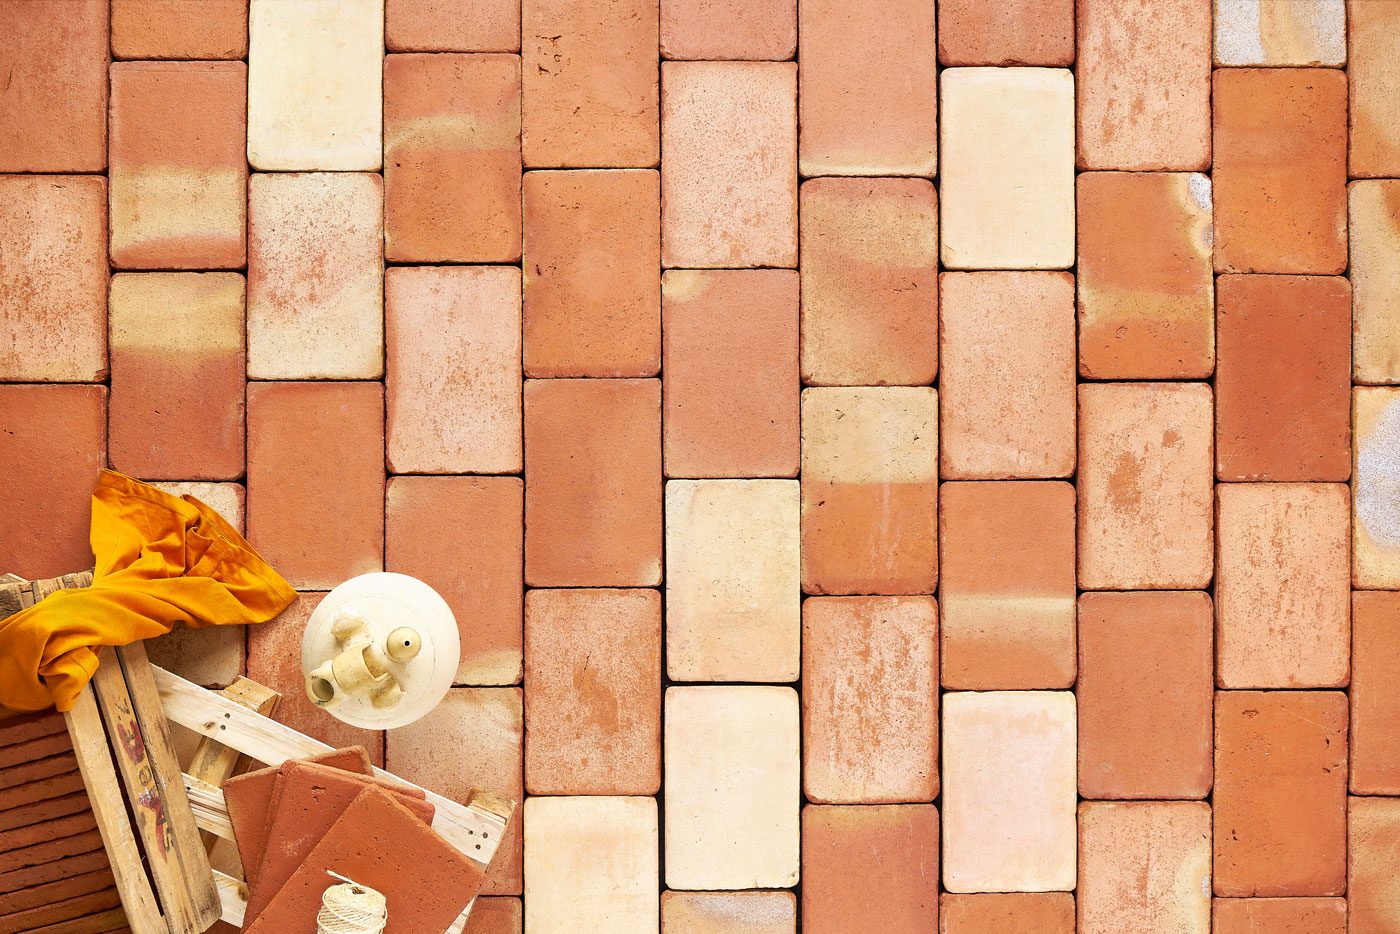 Image of a terracotta floor made of ambar tiles